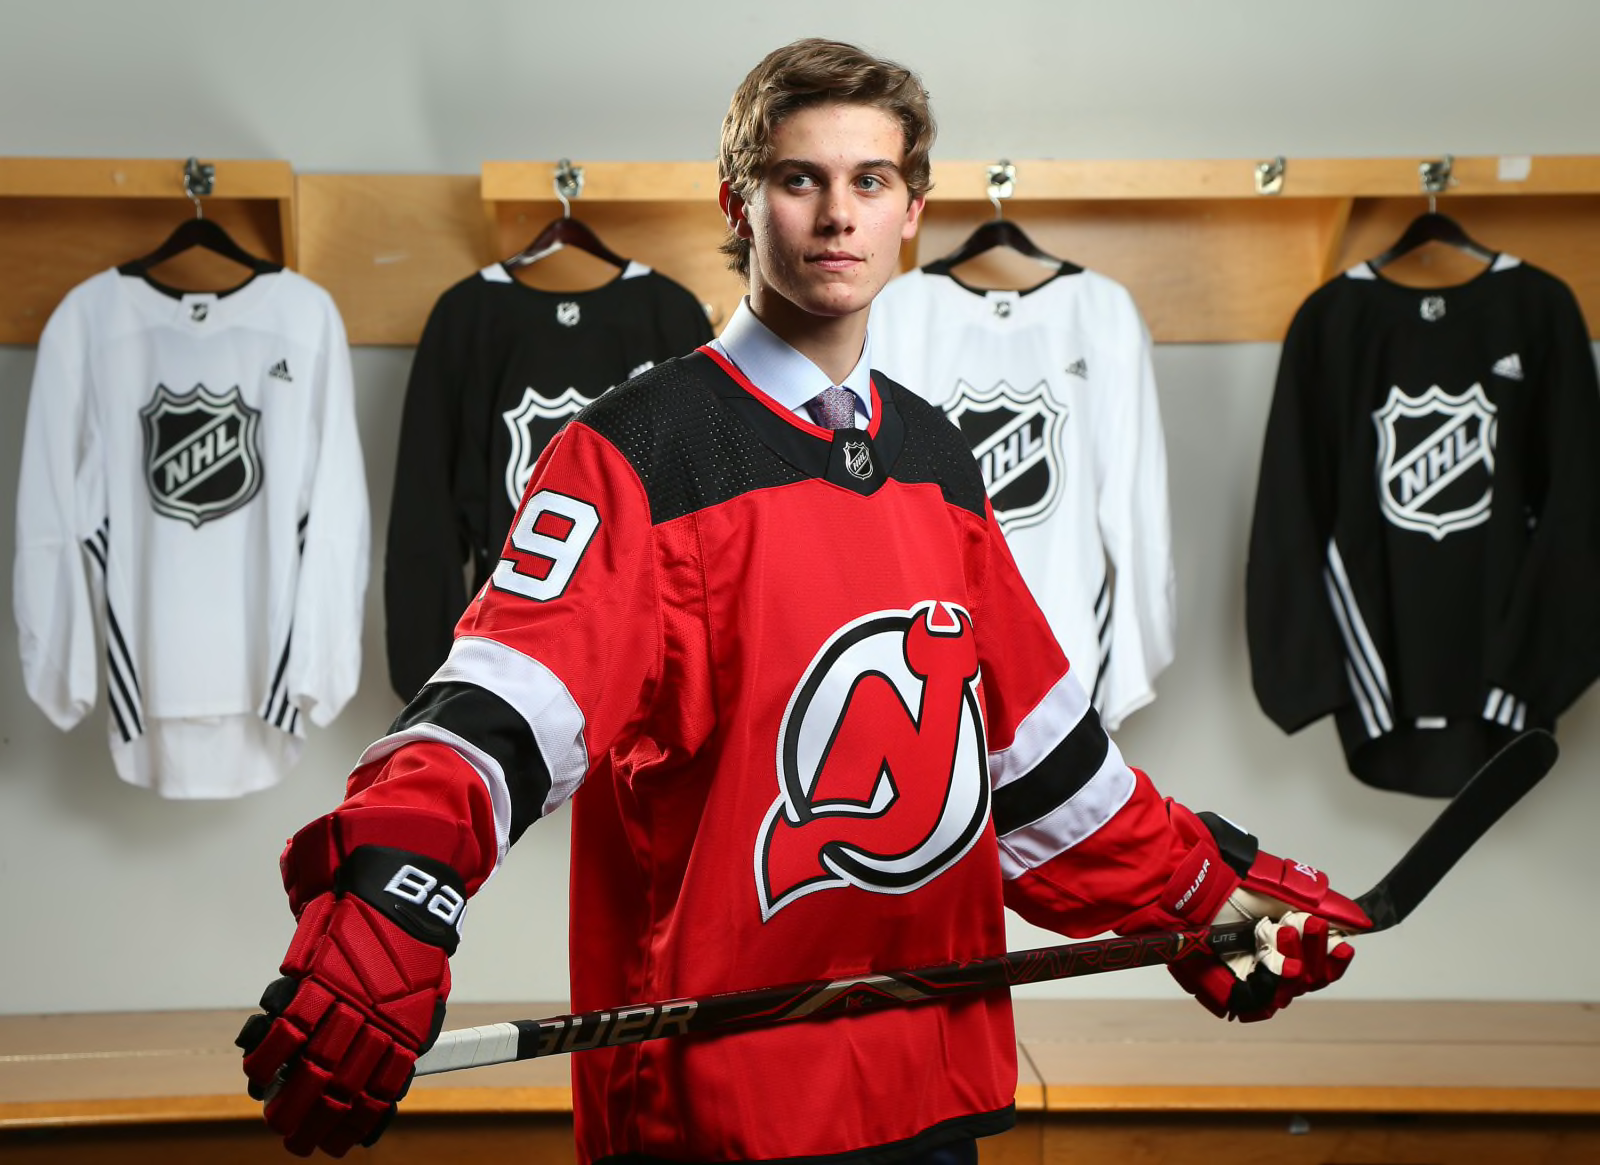 best new jersey devils players